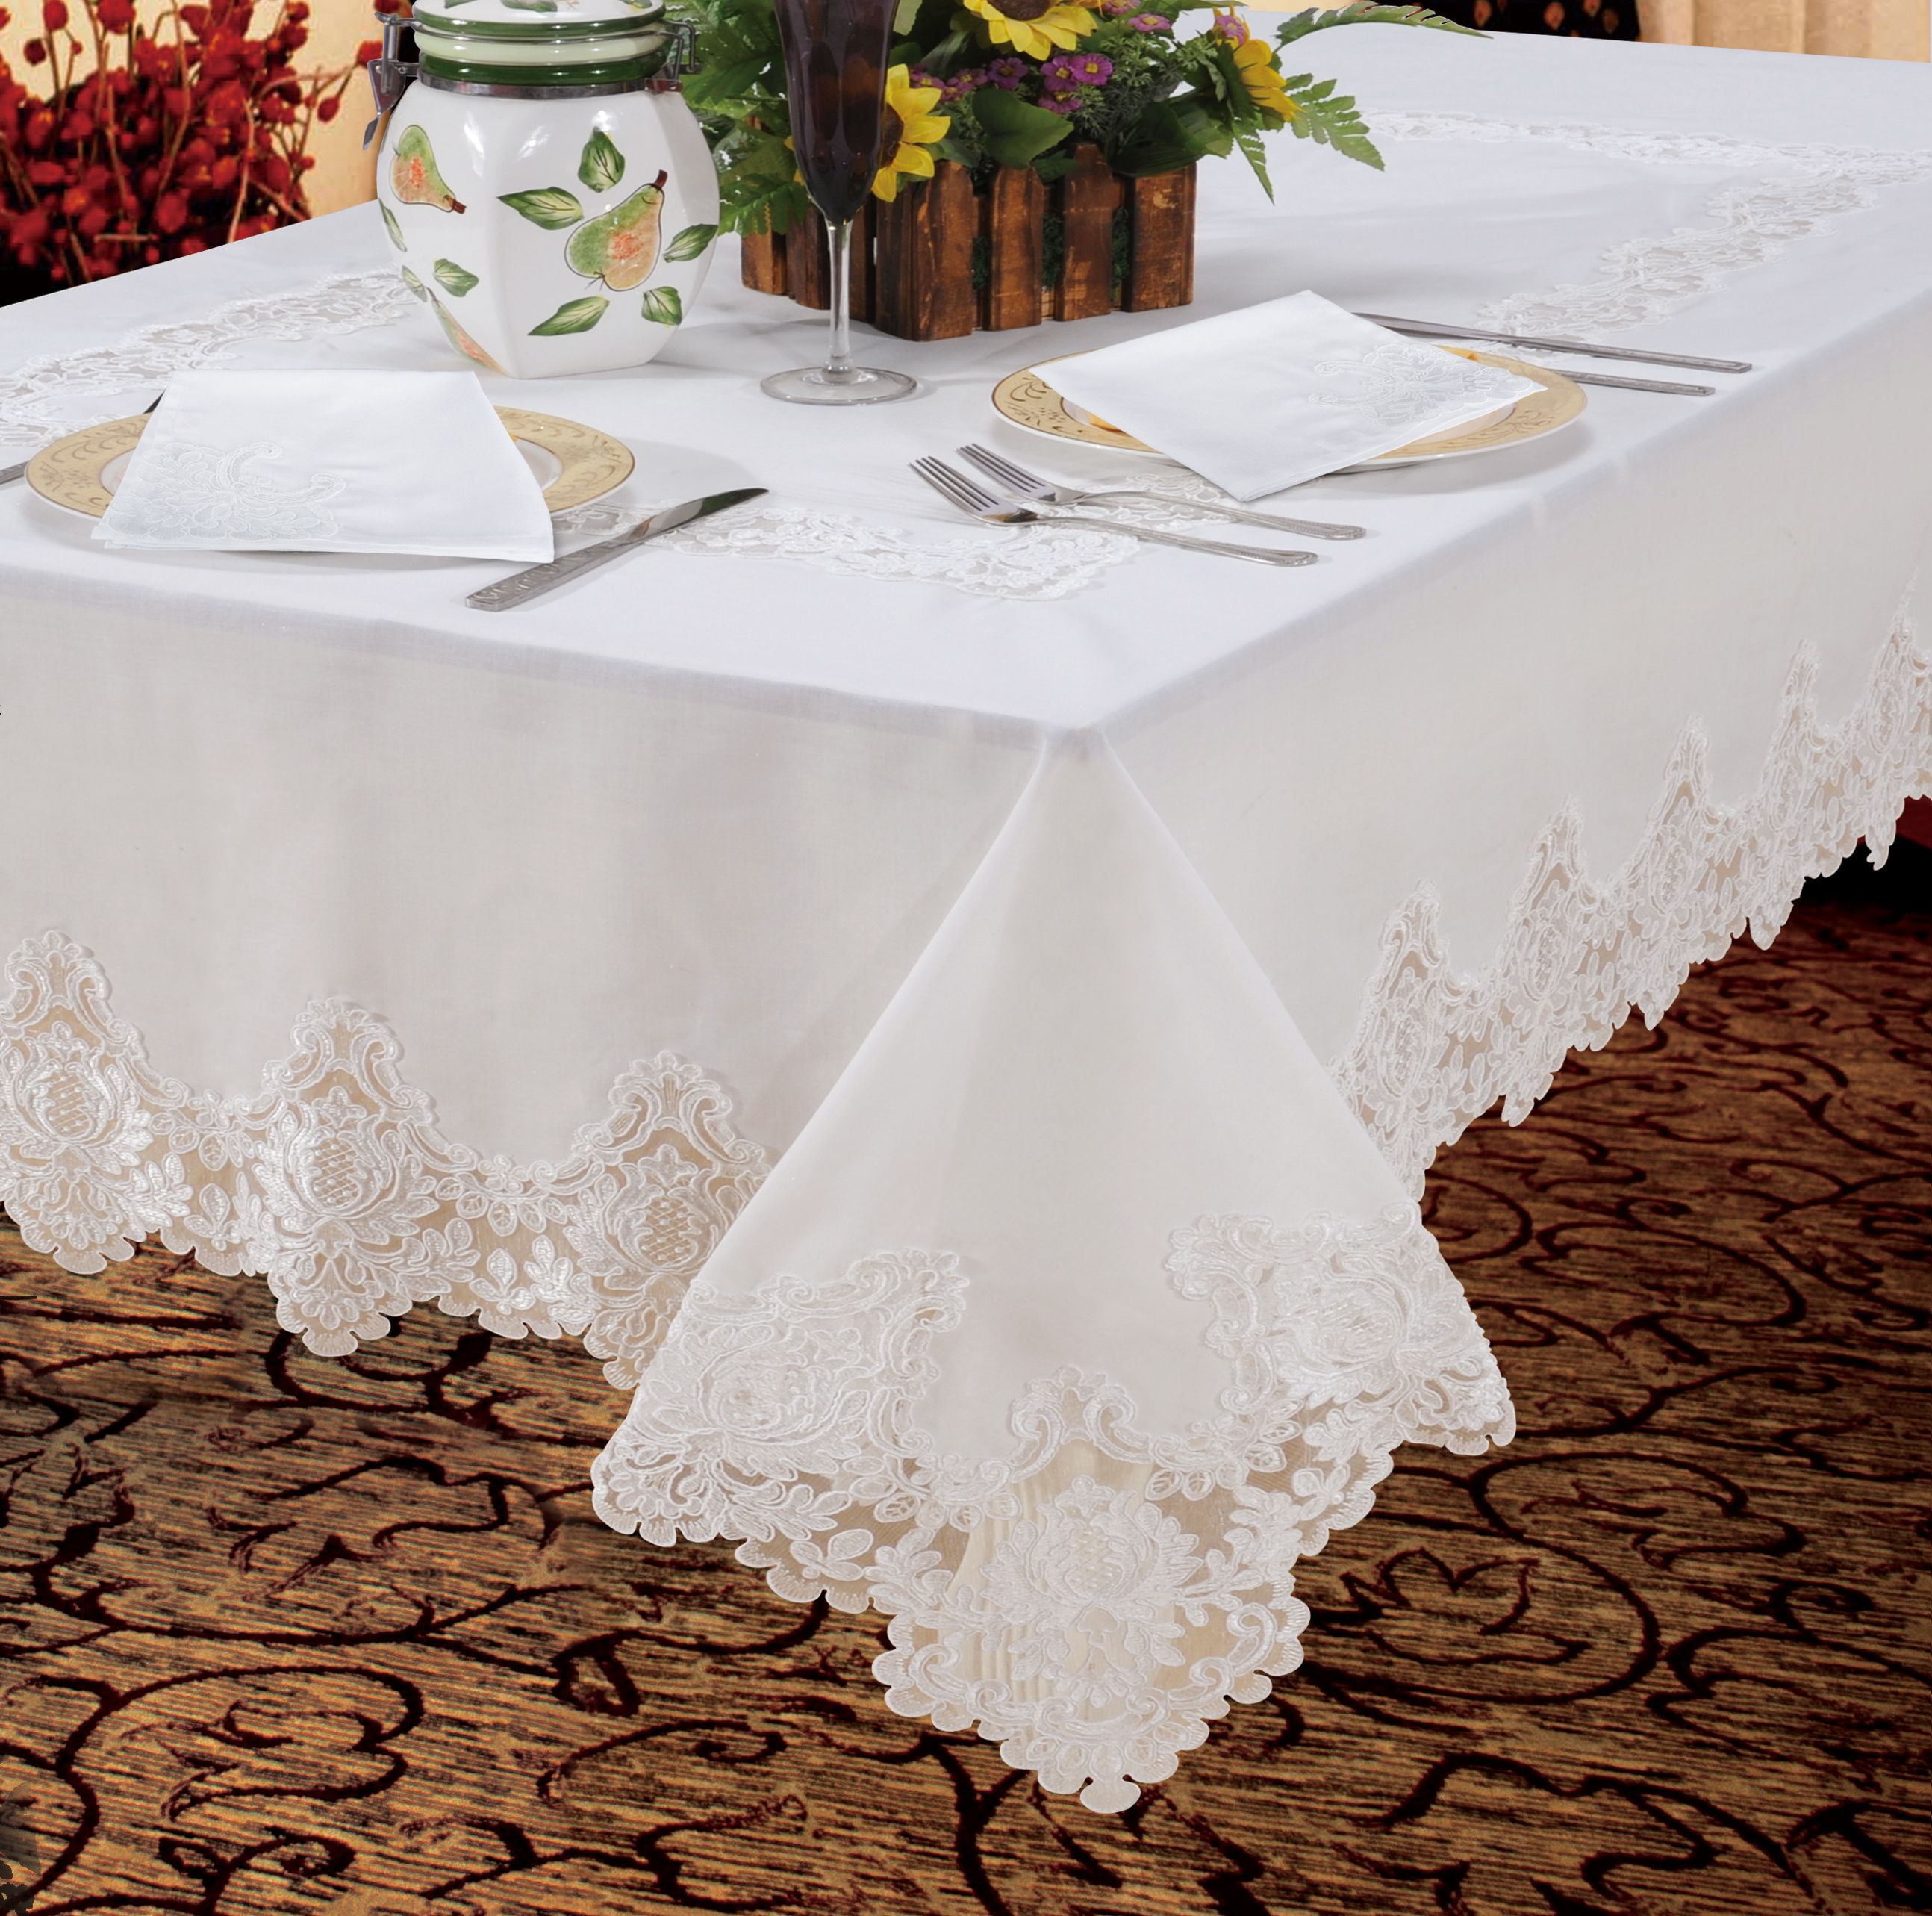 Oval Table Cloth Floral Tablecloth White Vintage Embroidered Lace Doilies 15x33"